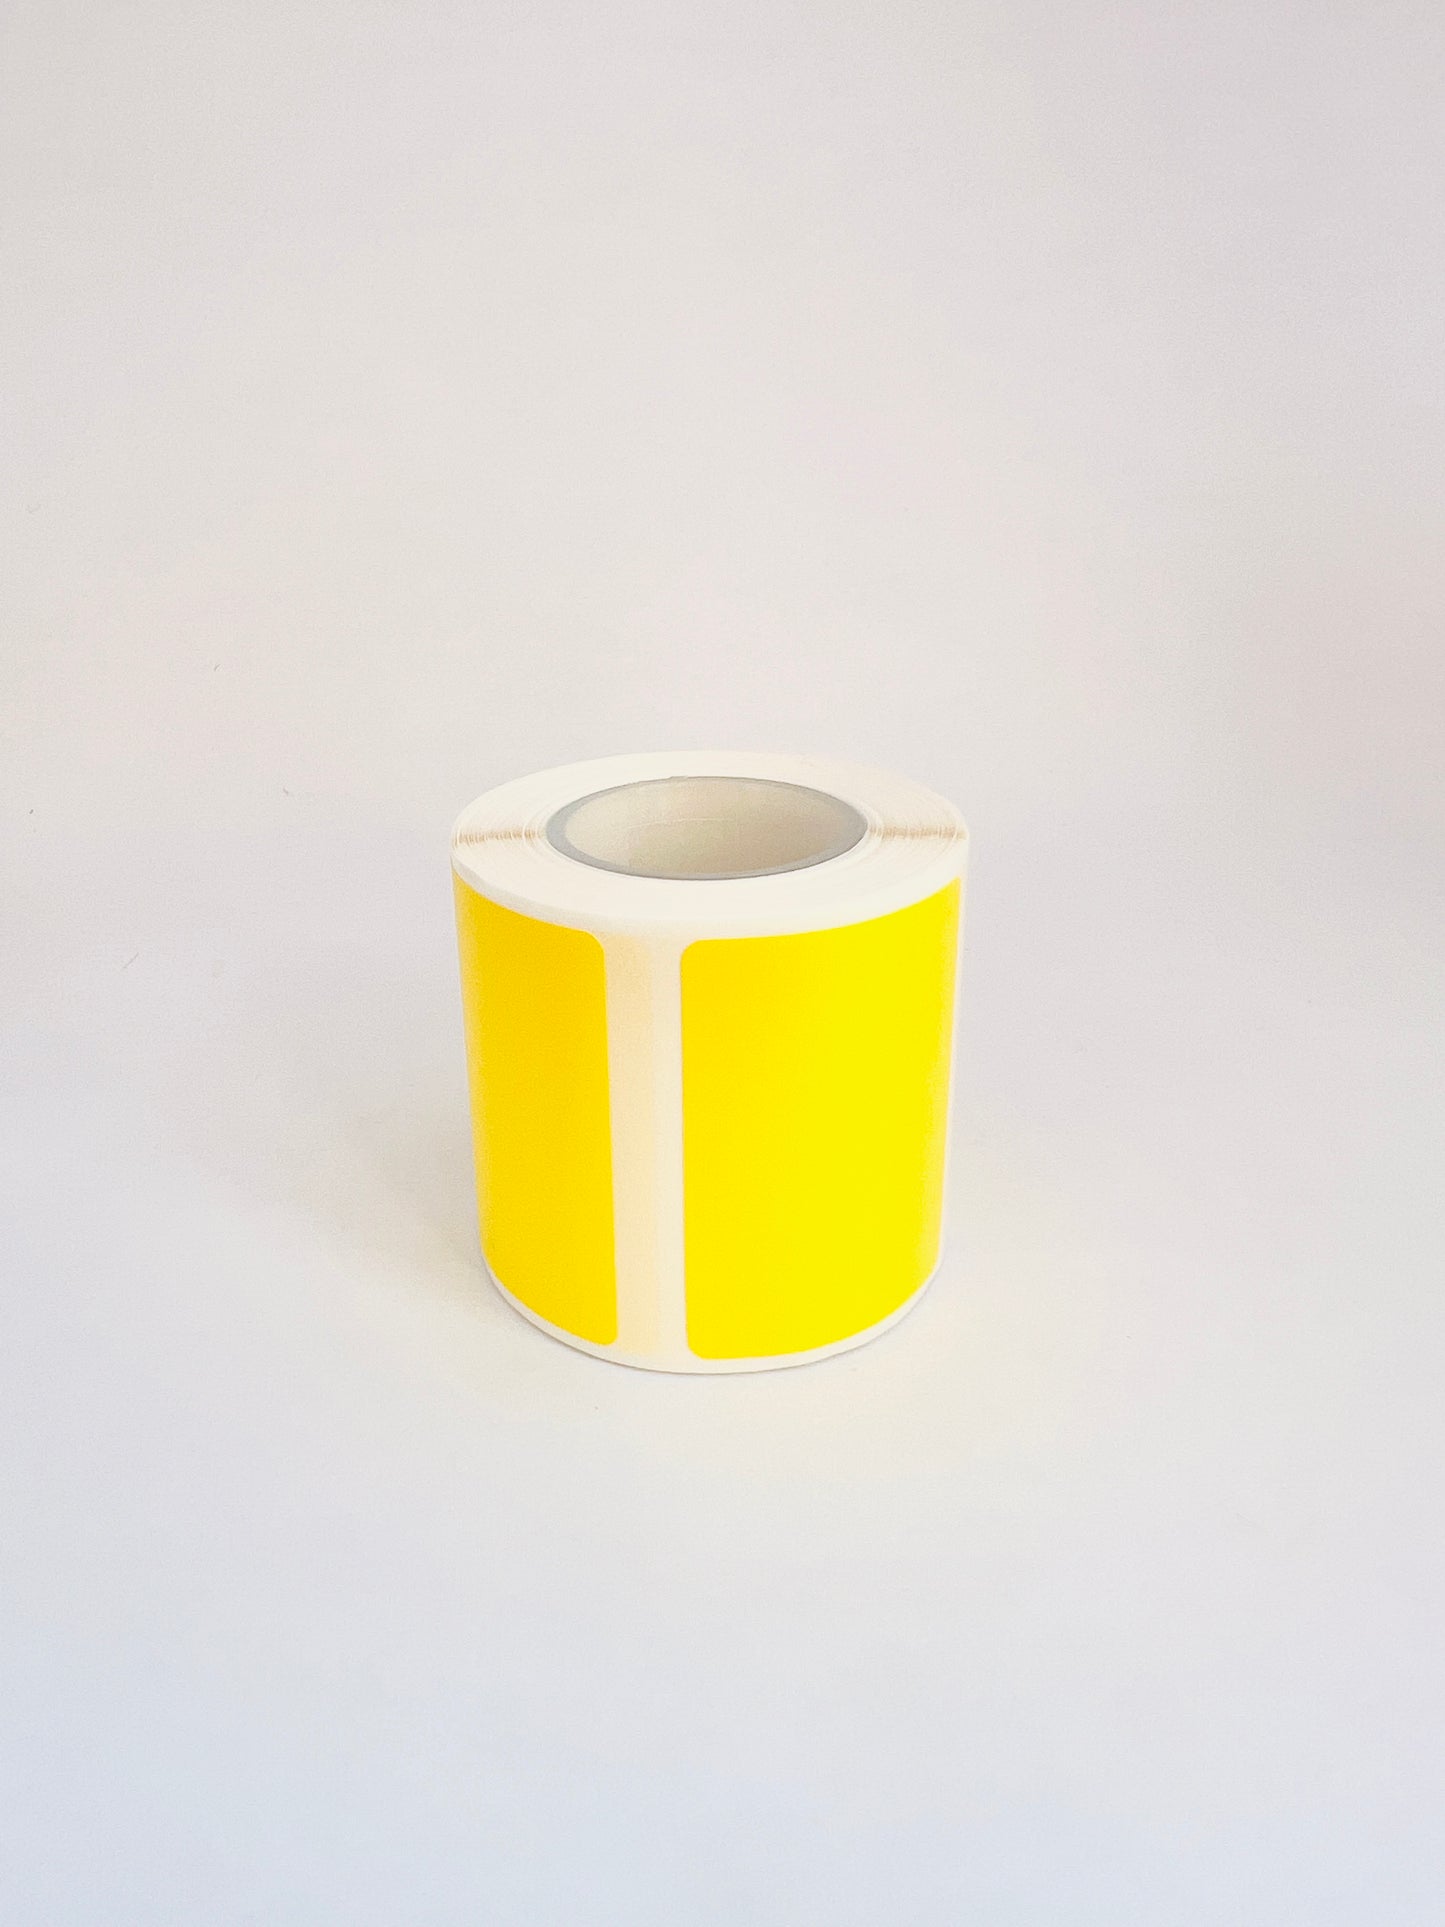 Yellow Rectangle Labels - 230 per roll 📒